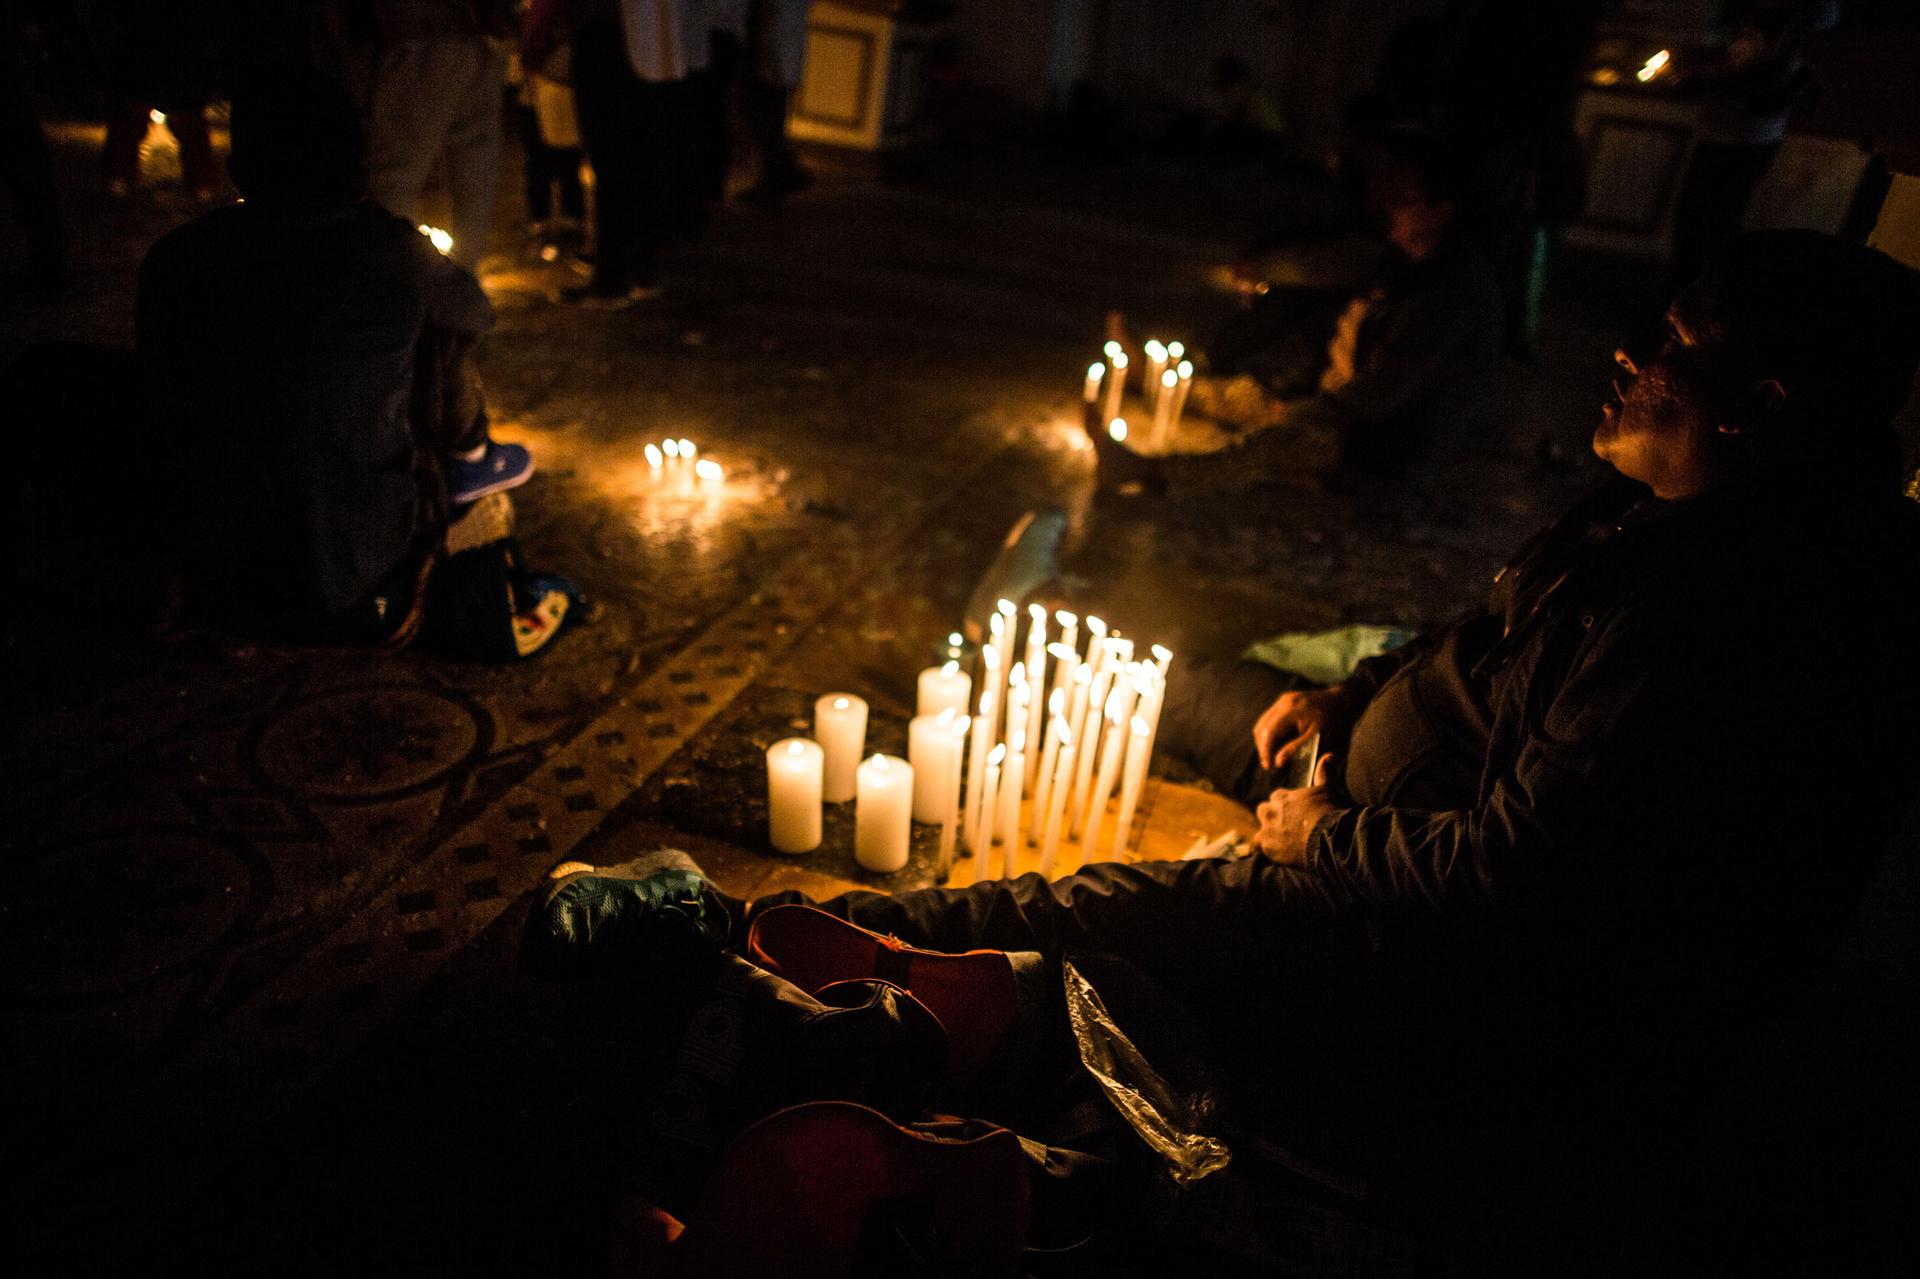 A person is shown sitting on the ground with their legs on either side of a display of several lit candles.